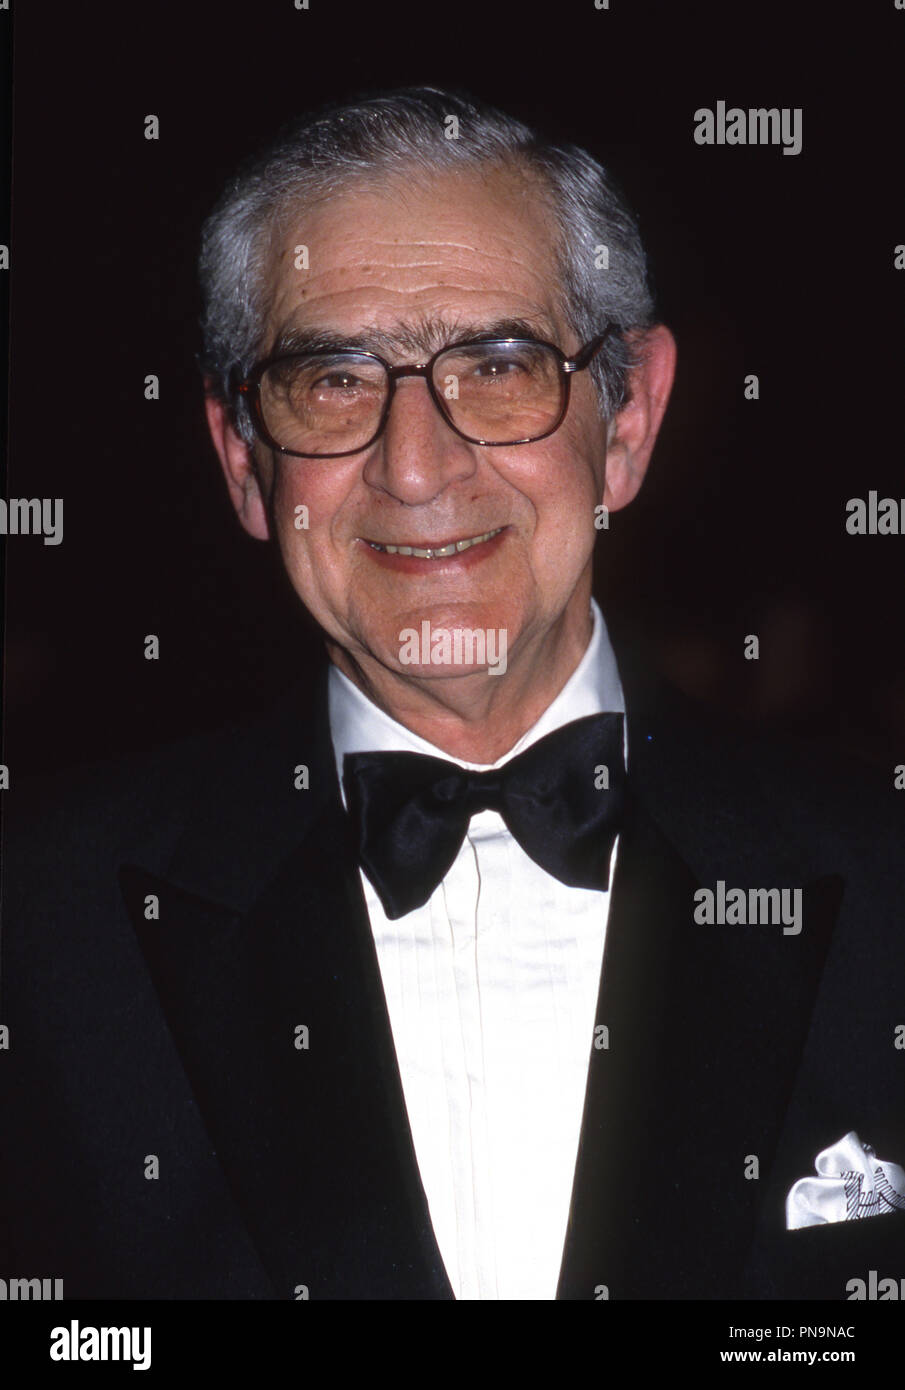 Photo Must Be Credited ©Alpha Press 023916 08/10/1996 Denis Norden attends the National Television Awards 1996 at the Royal Albert Hall in London Stock Photo